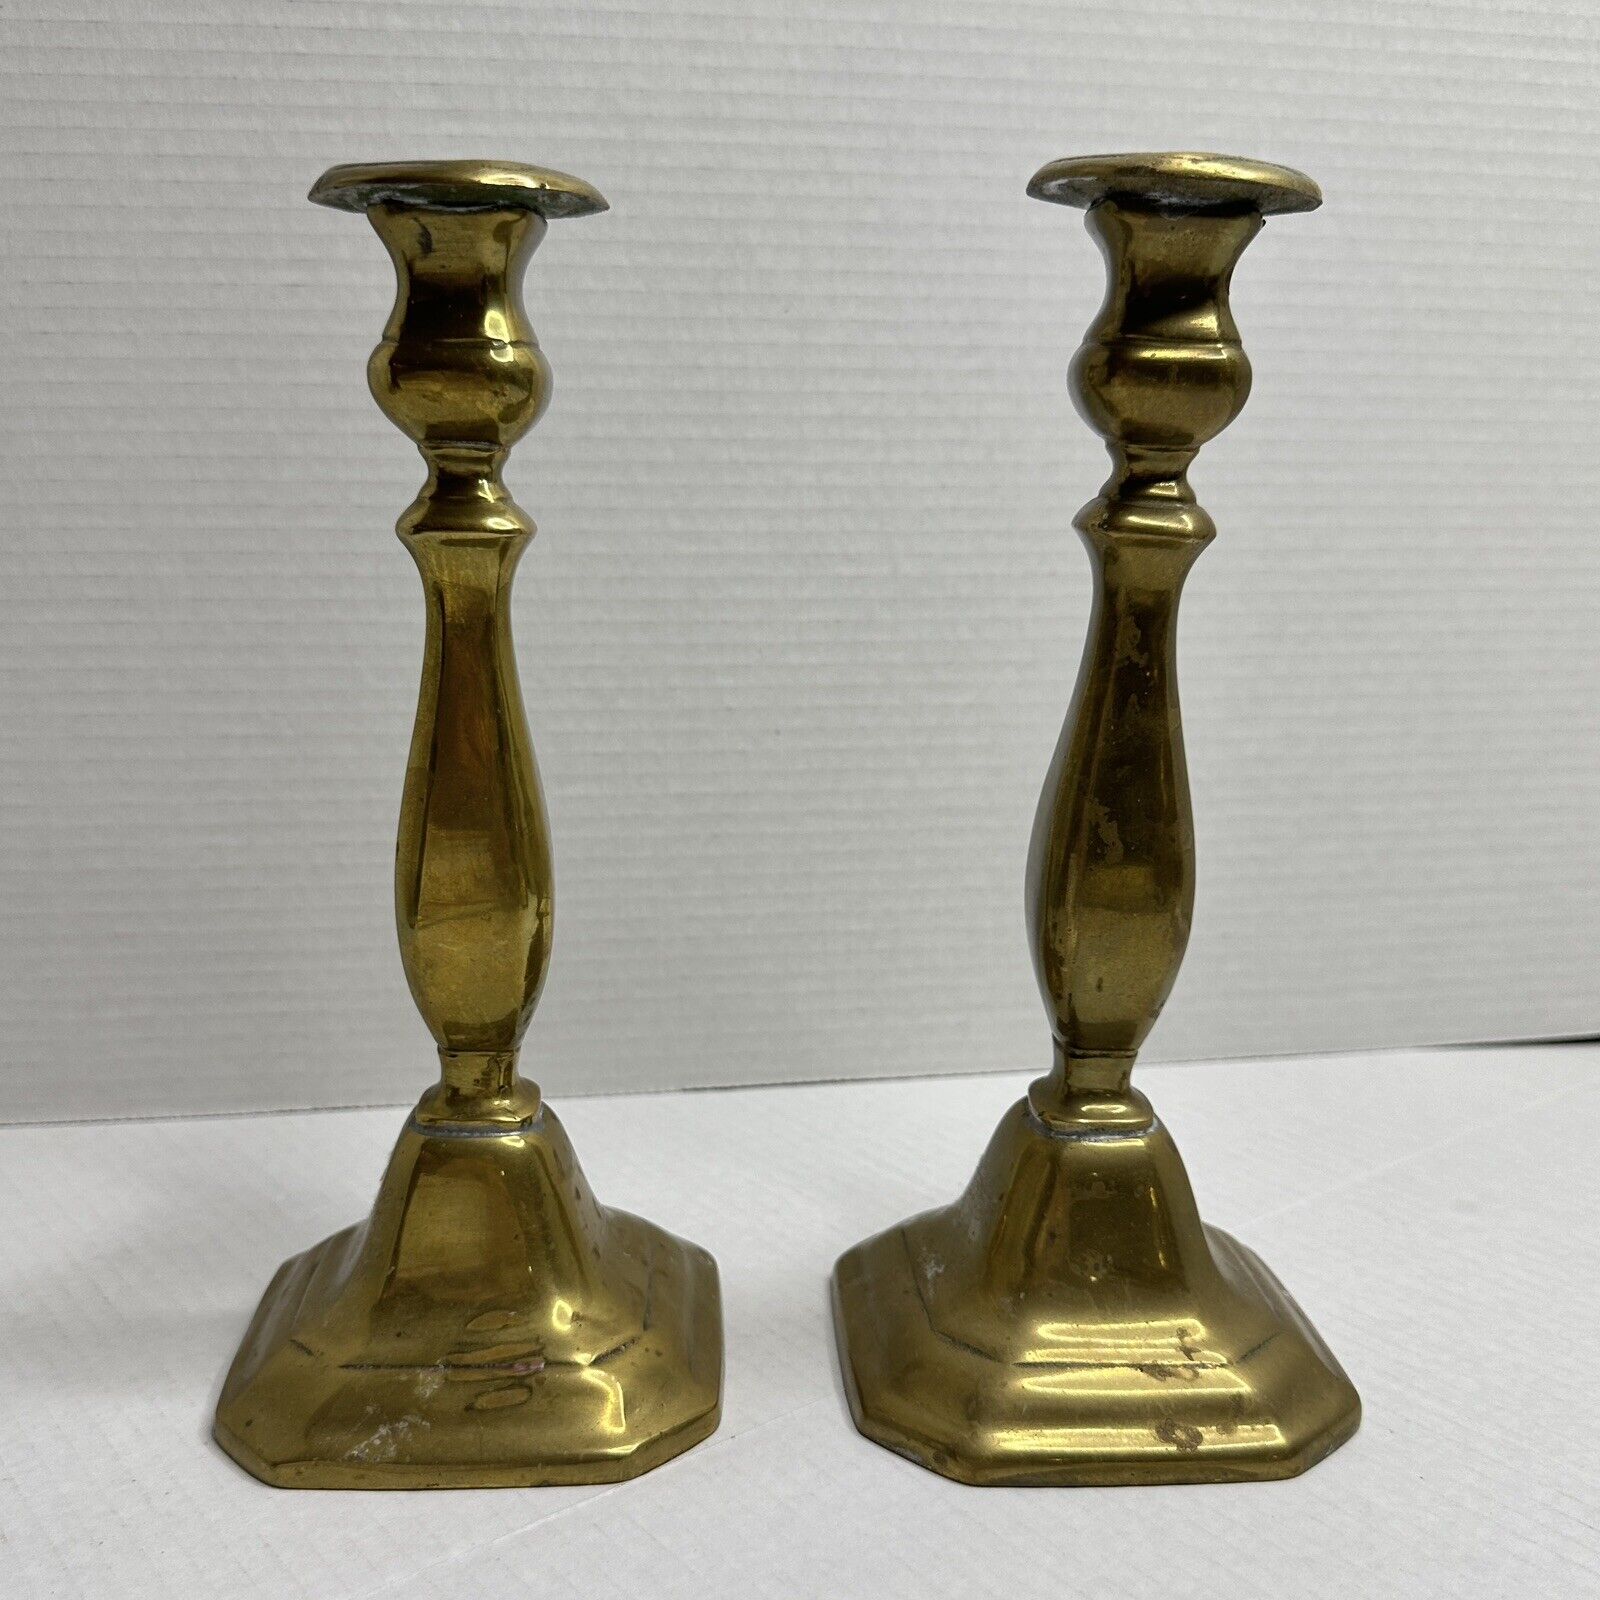 Vintage Pair Brass Candlesticks 10” Tall Heavy Table Candle